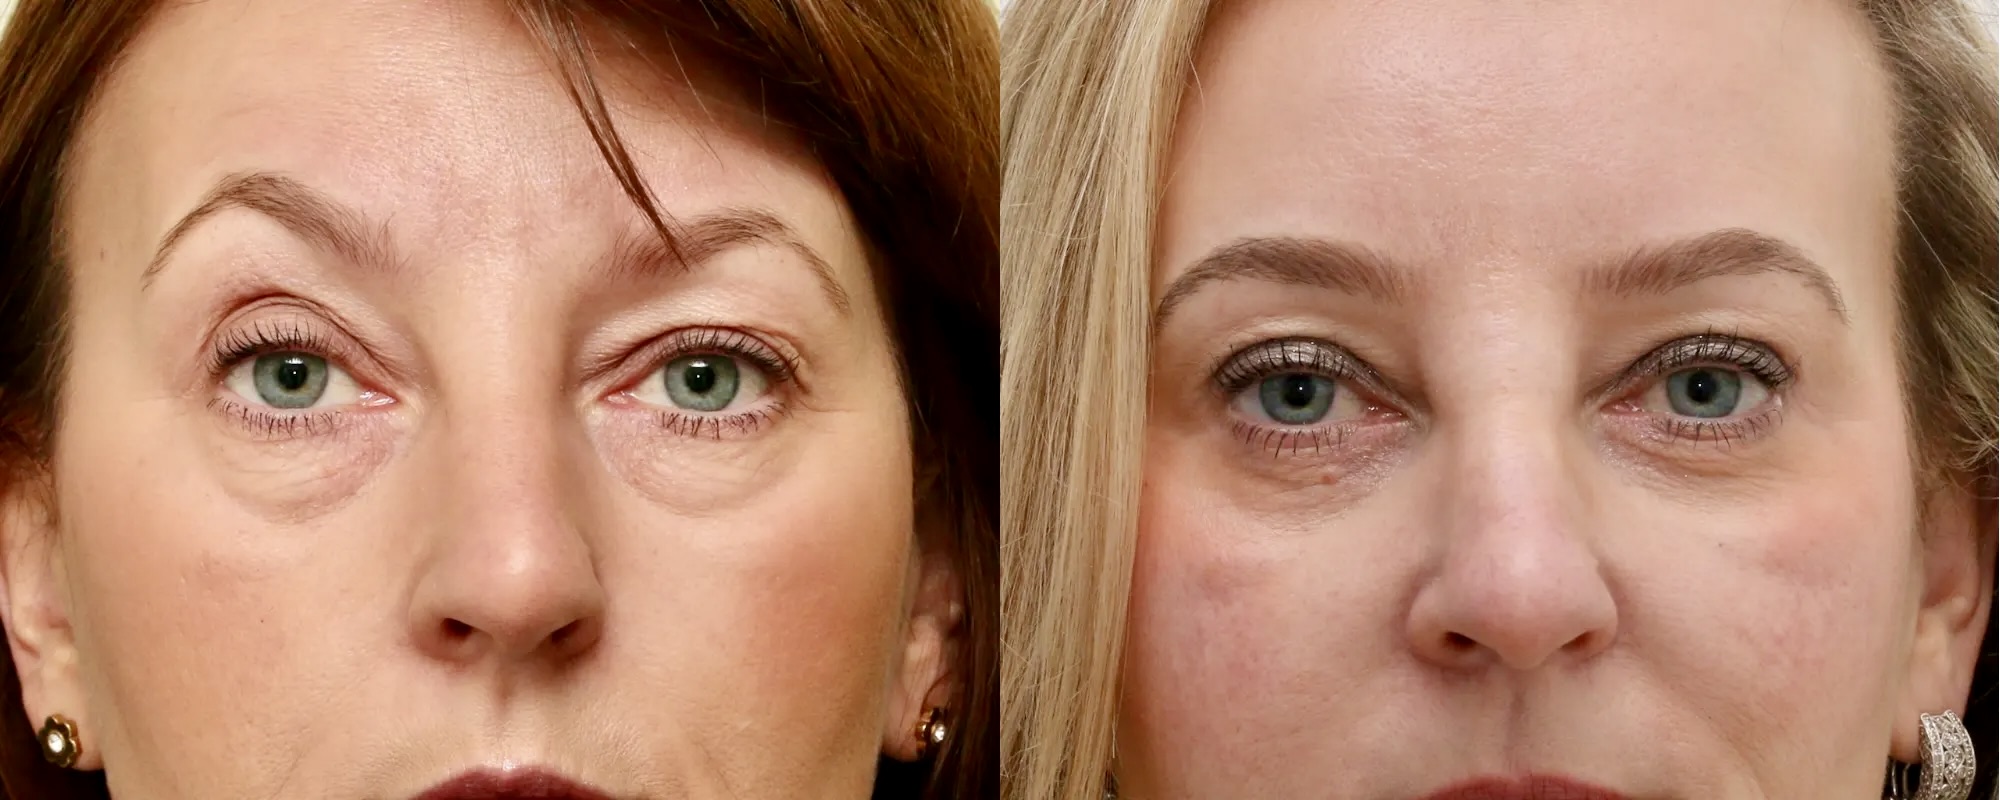 Lower and upper eyelid surgery with fat transfer